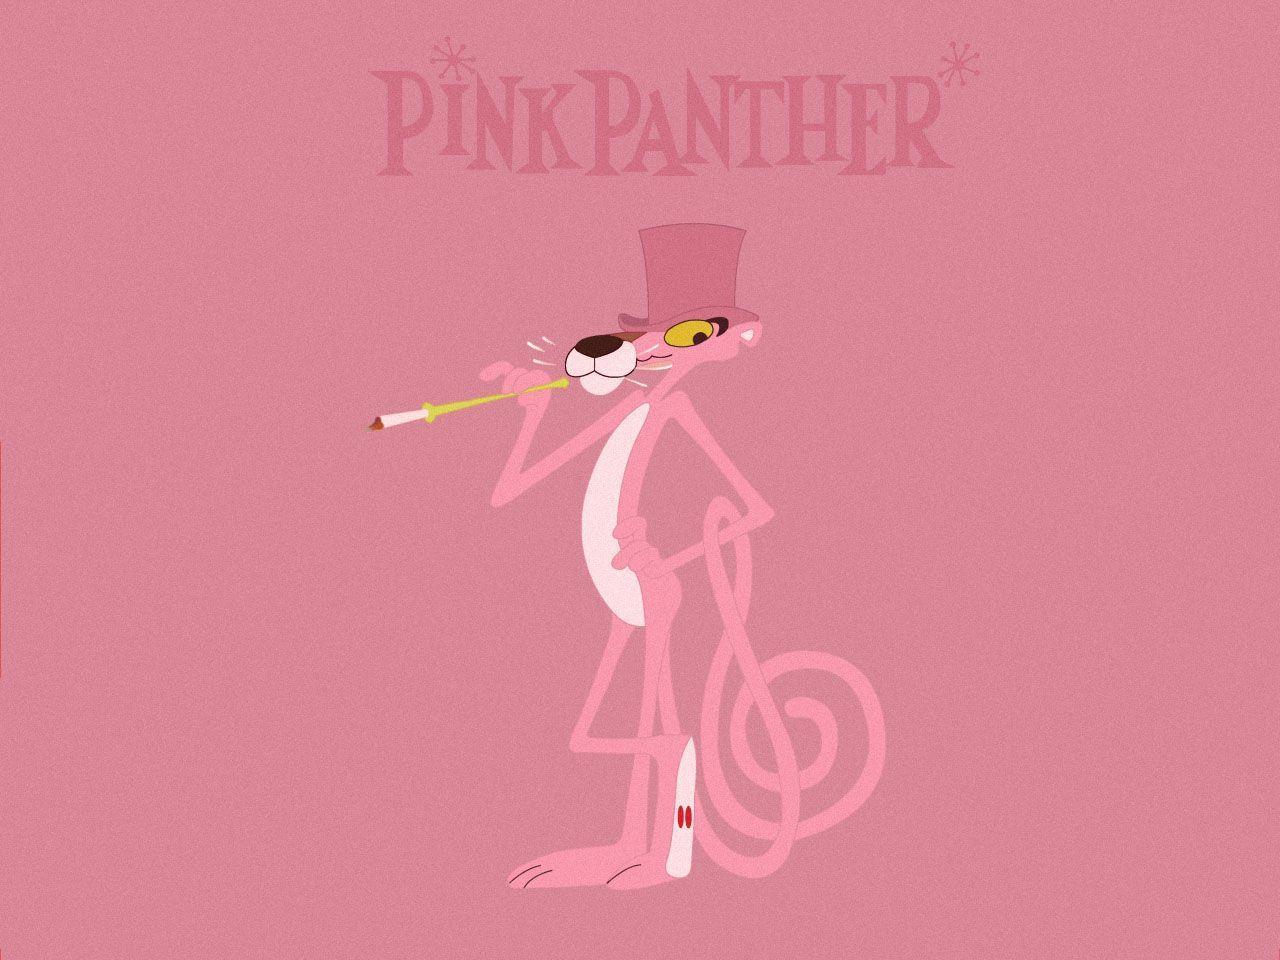 A pink panther character smoking on the cover of an album - Pink Panther